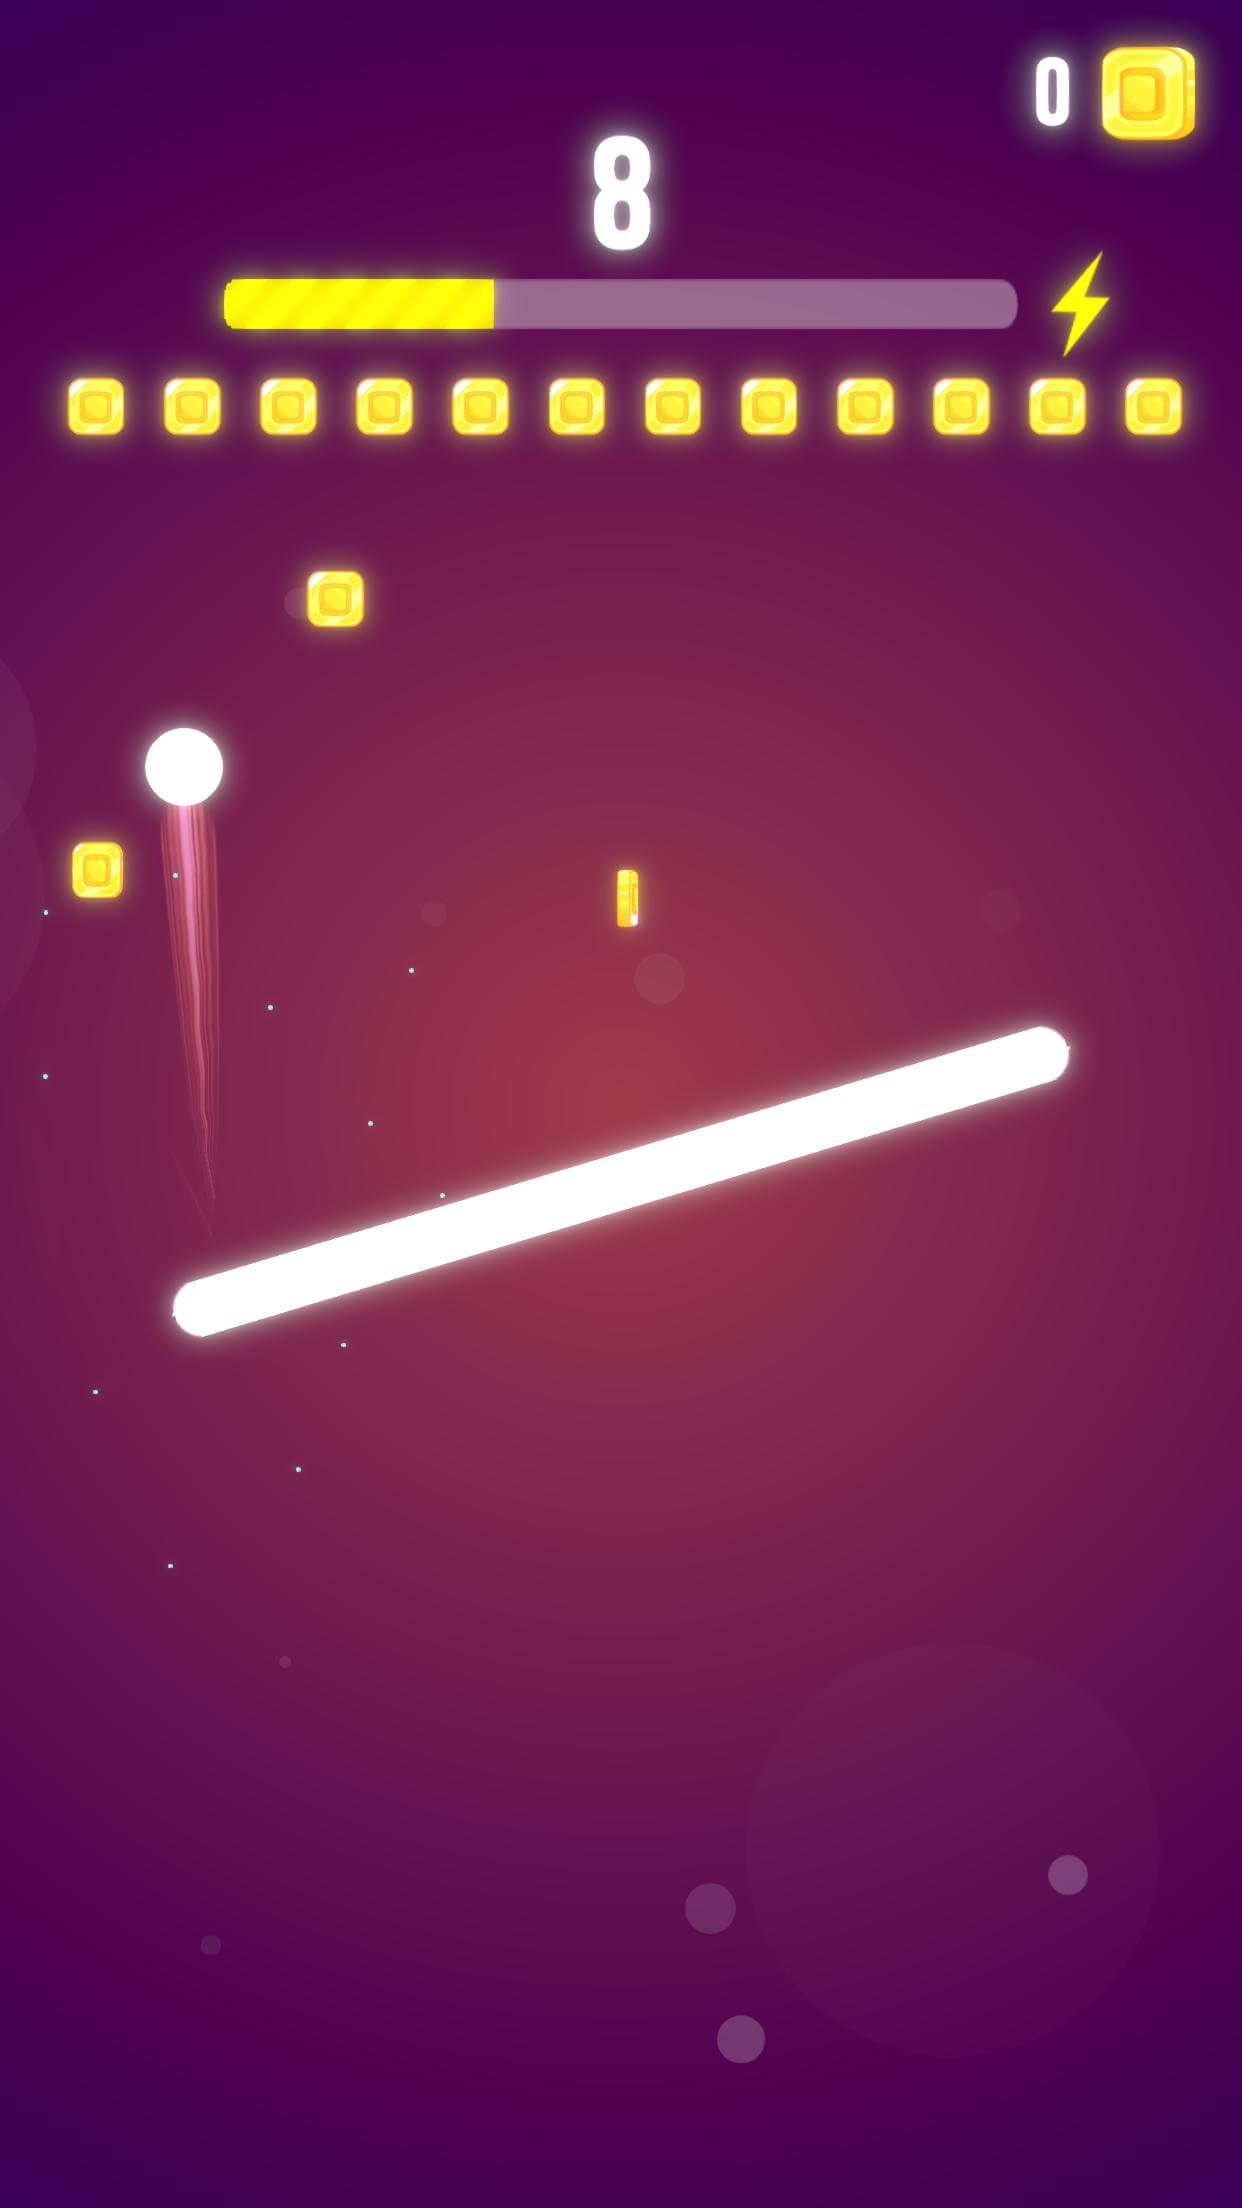 Ball Dropped Game Apple AppStore - Google Play Store Image 4